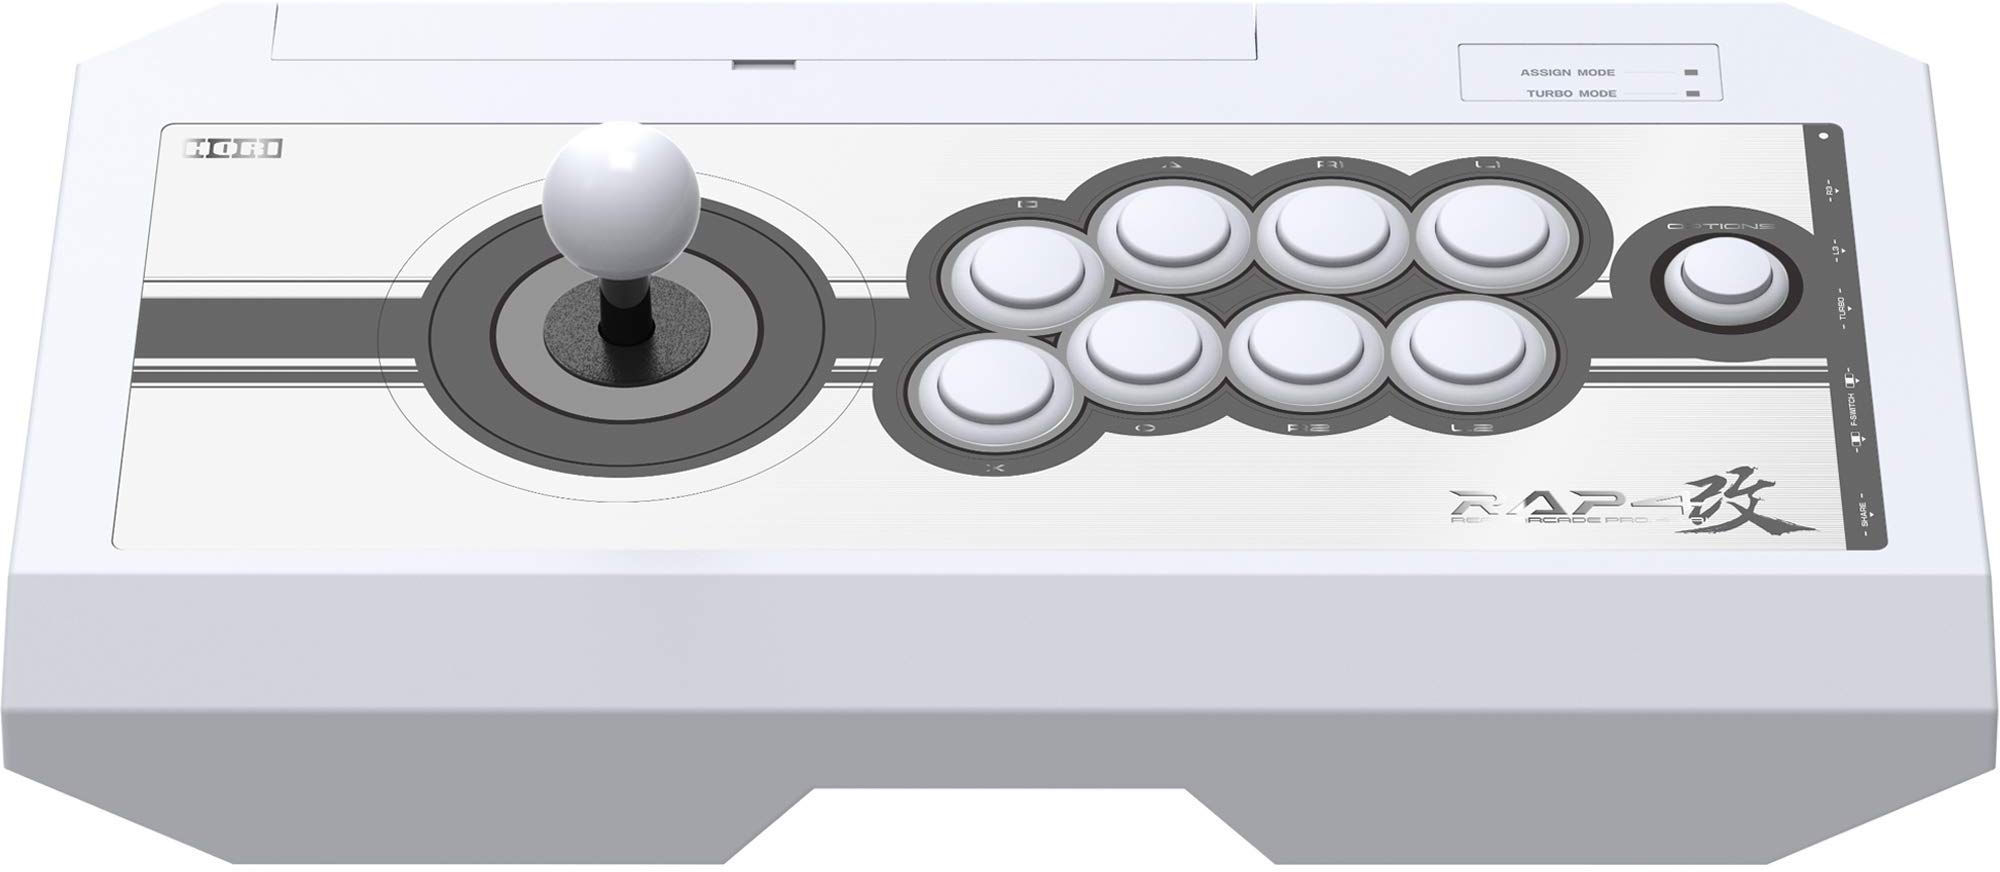 Best Arcade Pads for Playstation 4 HORI Real Arcade Pro 4 Kai